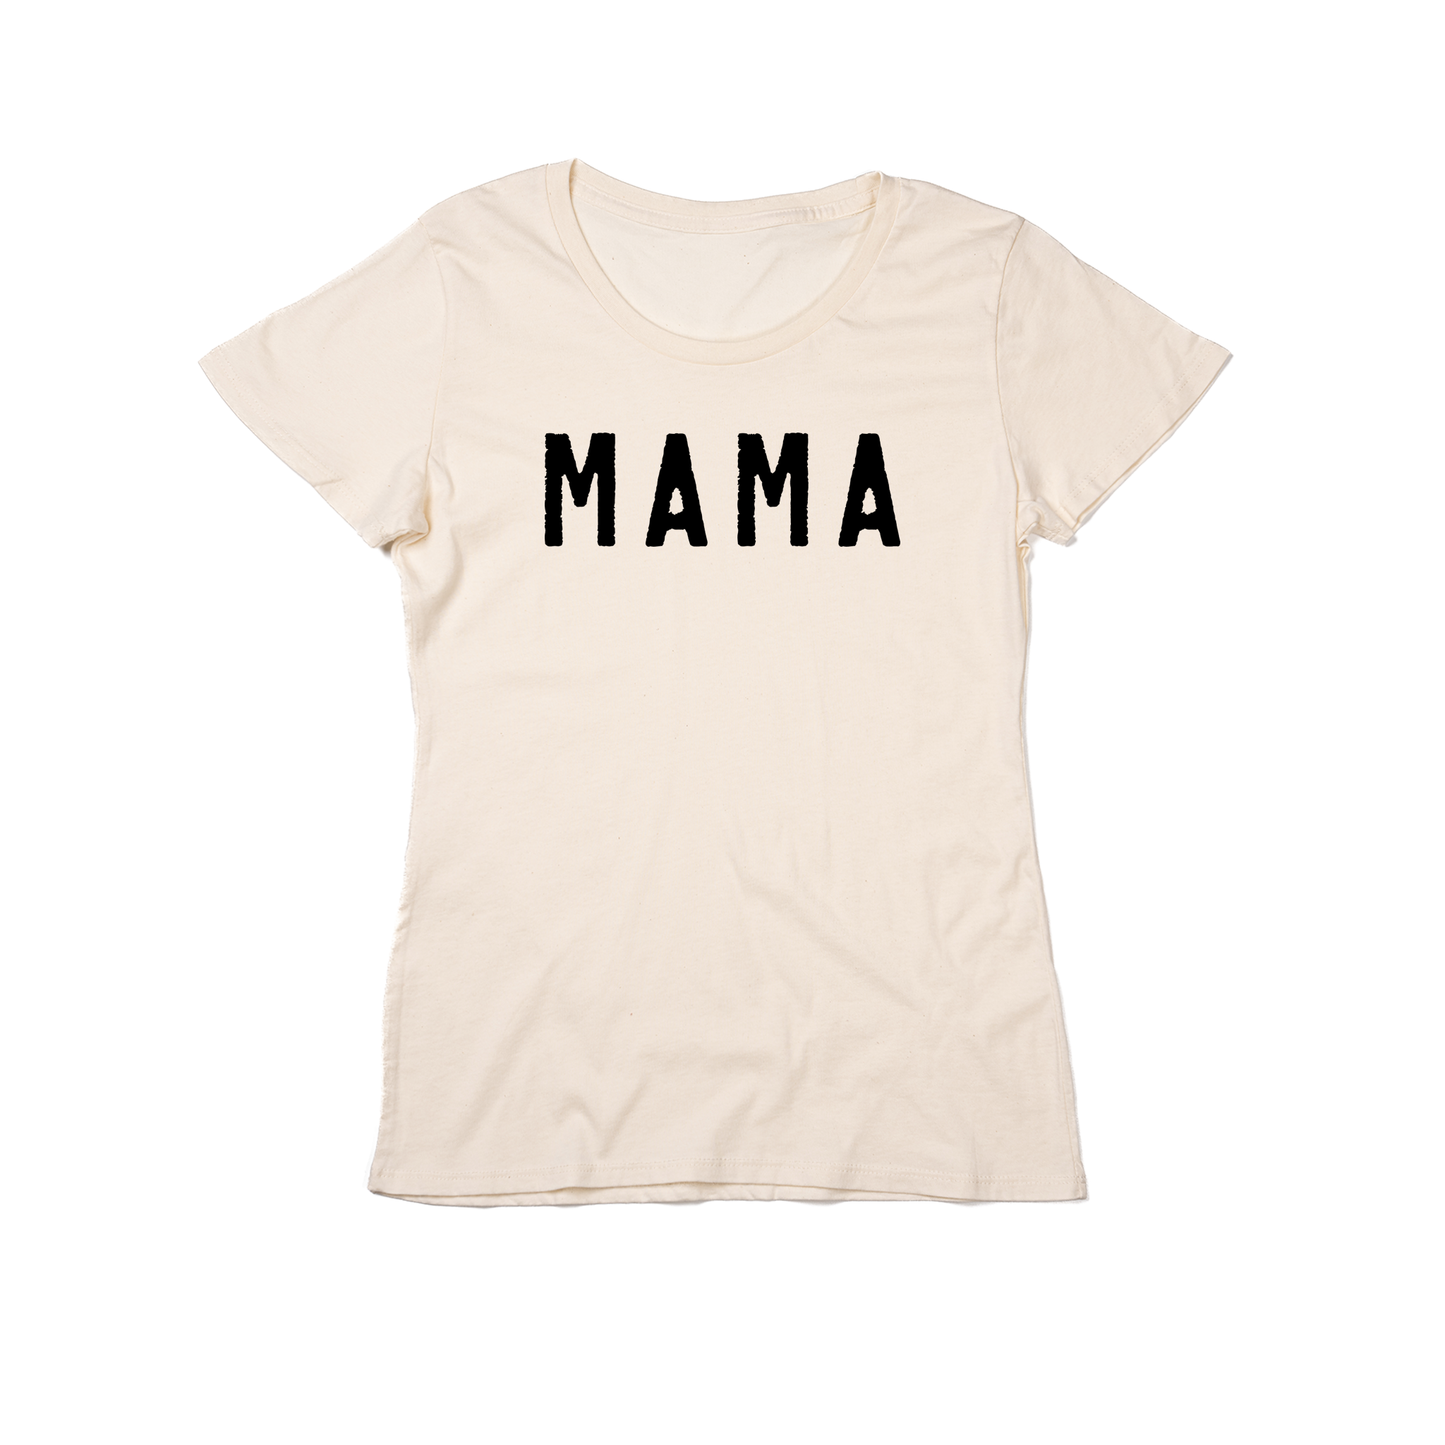 Mama (Rough, Black) - Women's Fitted Tee (Natural)